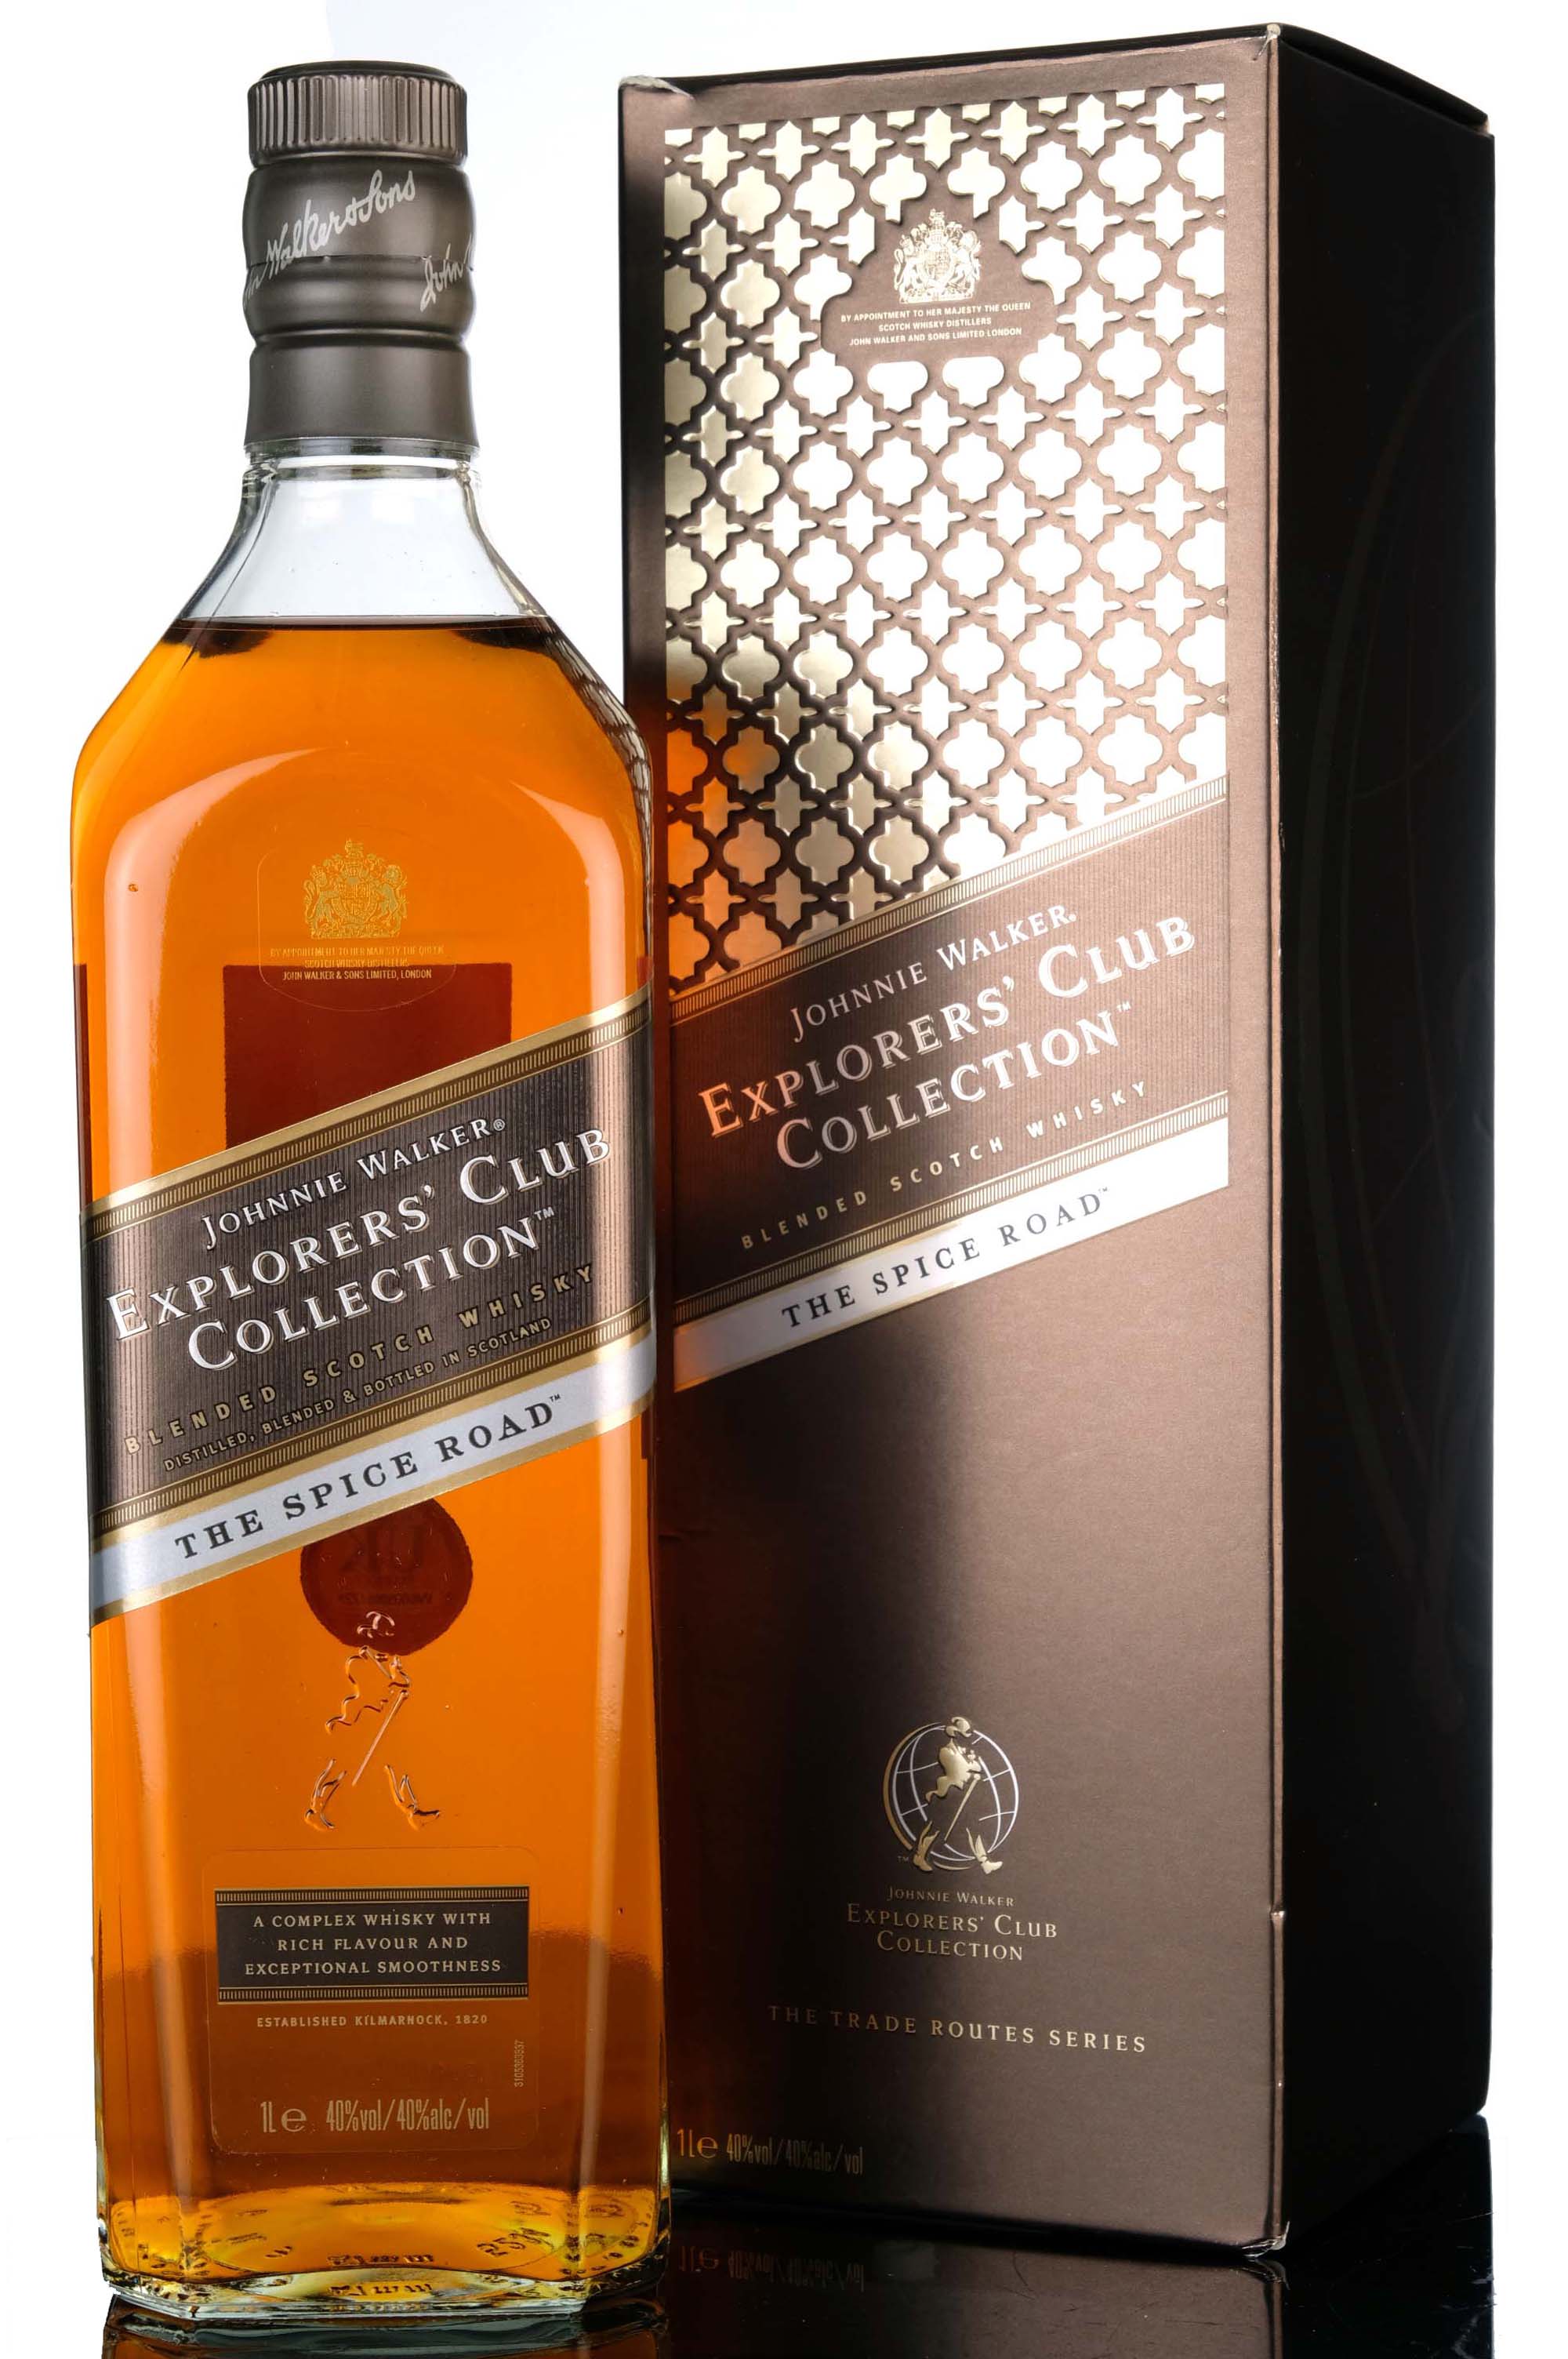 Johnnie Walker Explorers Club Collection - The Spice Road - 1 Litre